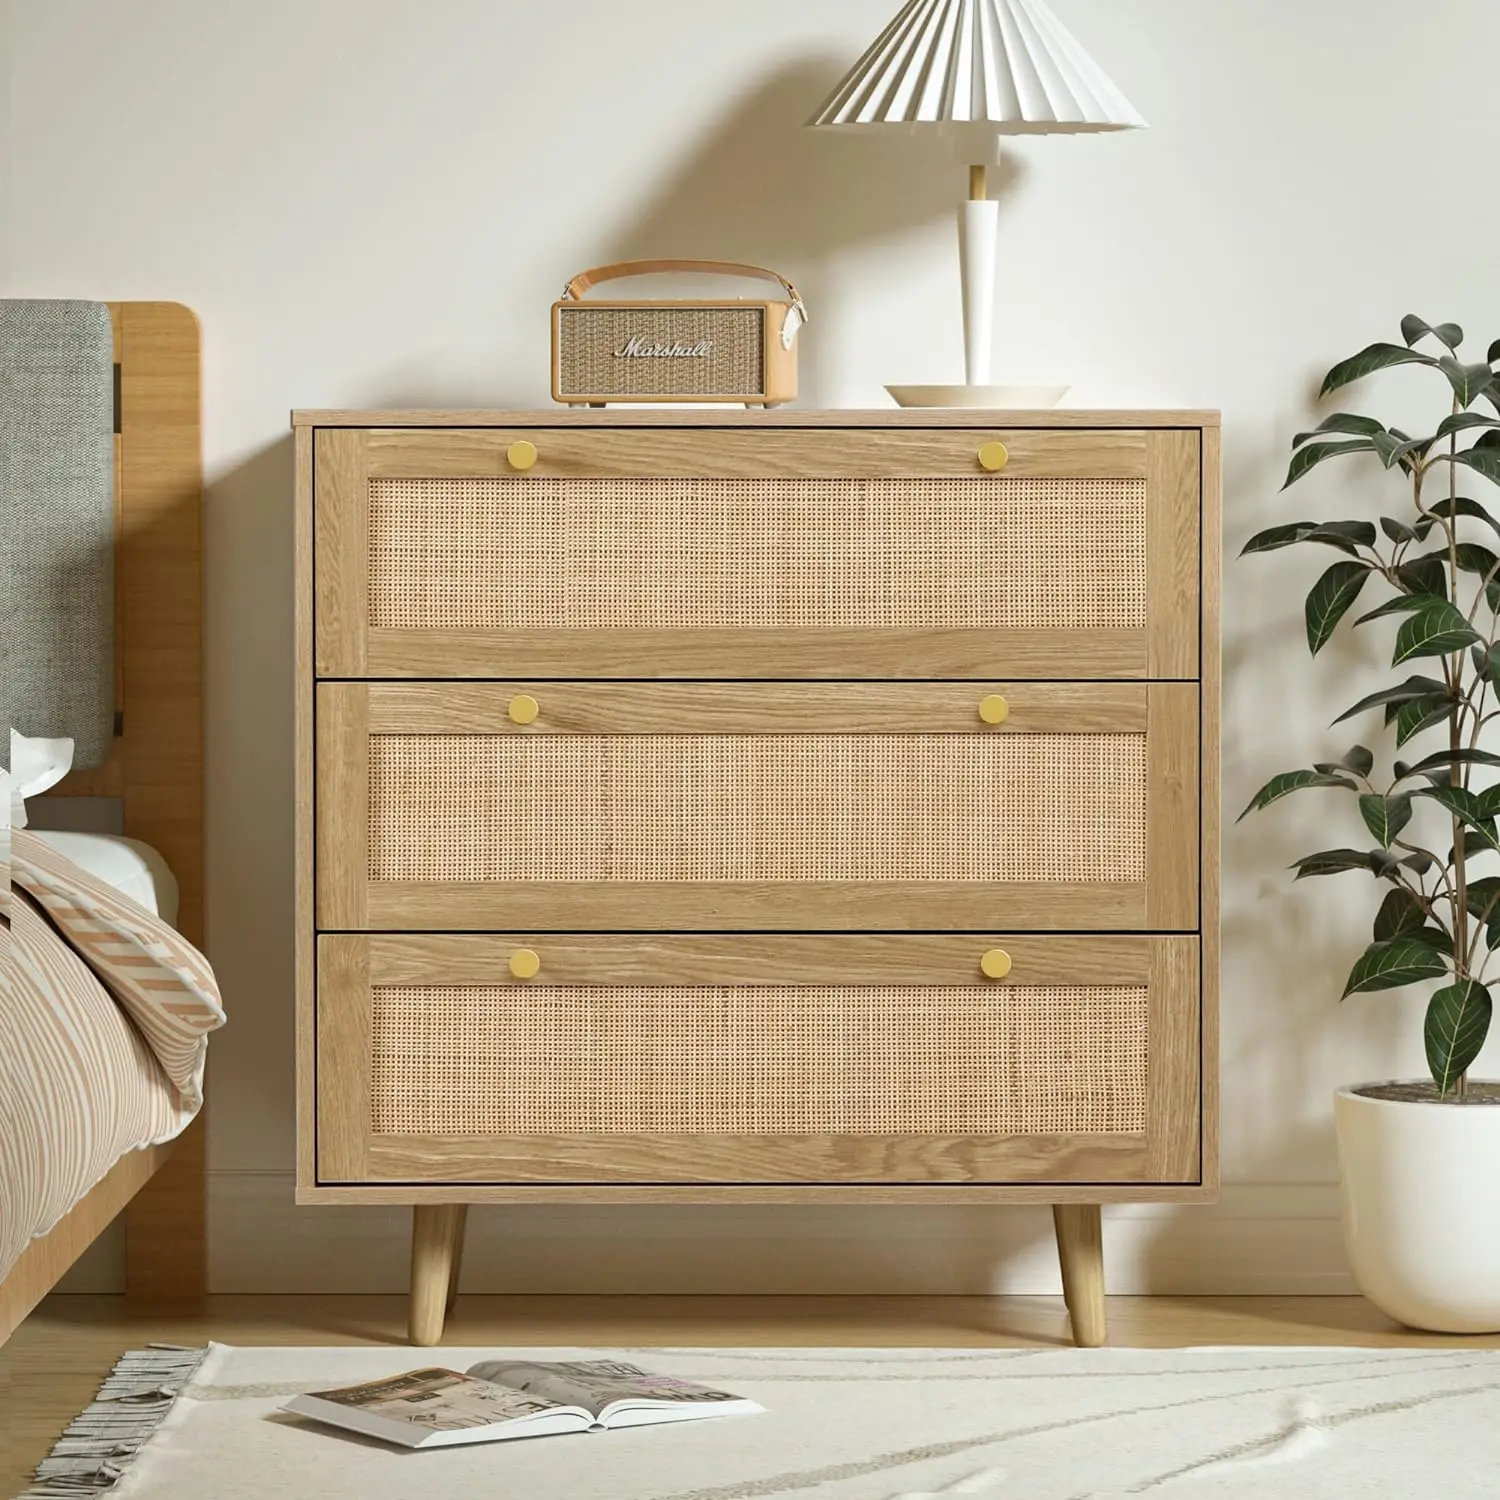 

3 Drawer Dresser for Bedroom, Rattan Dresser Modern Wood Chest of Drawers with Spacious Storage for Bedroom Hallway Living Room